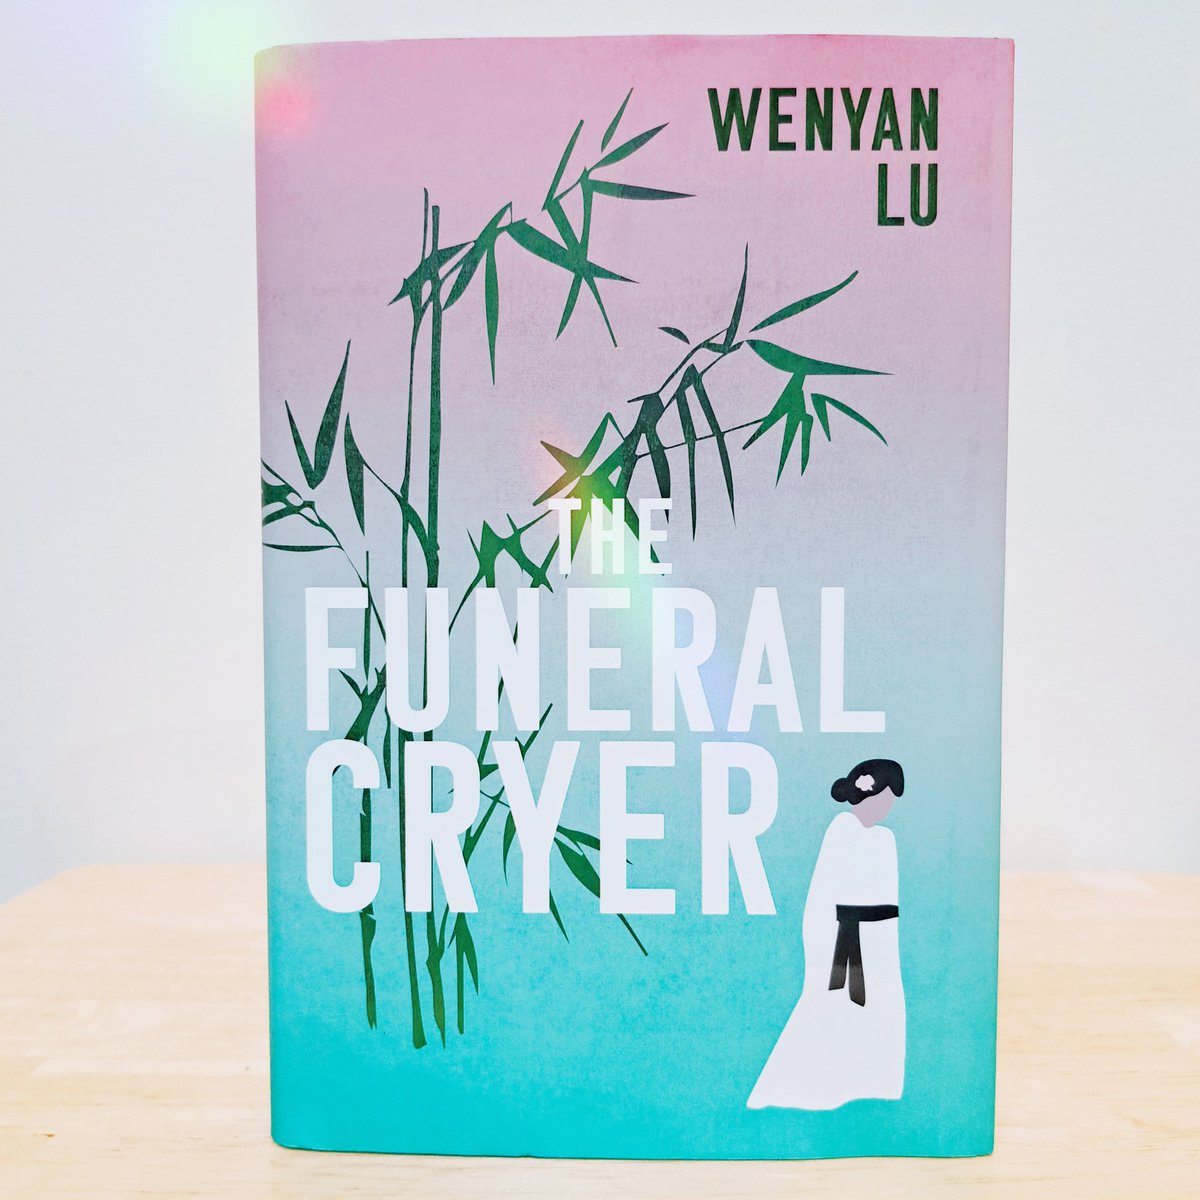 I loved #TheFuneralCryer by @wenyan_lu

An utterly captivating tale of a professional funeral cryer. A book that I will be thinking about for a long time. I couldn't put it down. An unforgettable protagonist. Brilliantly written & essential reading

I couldn't recommend this more